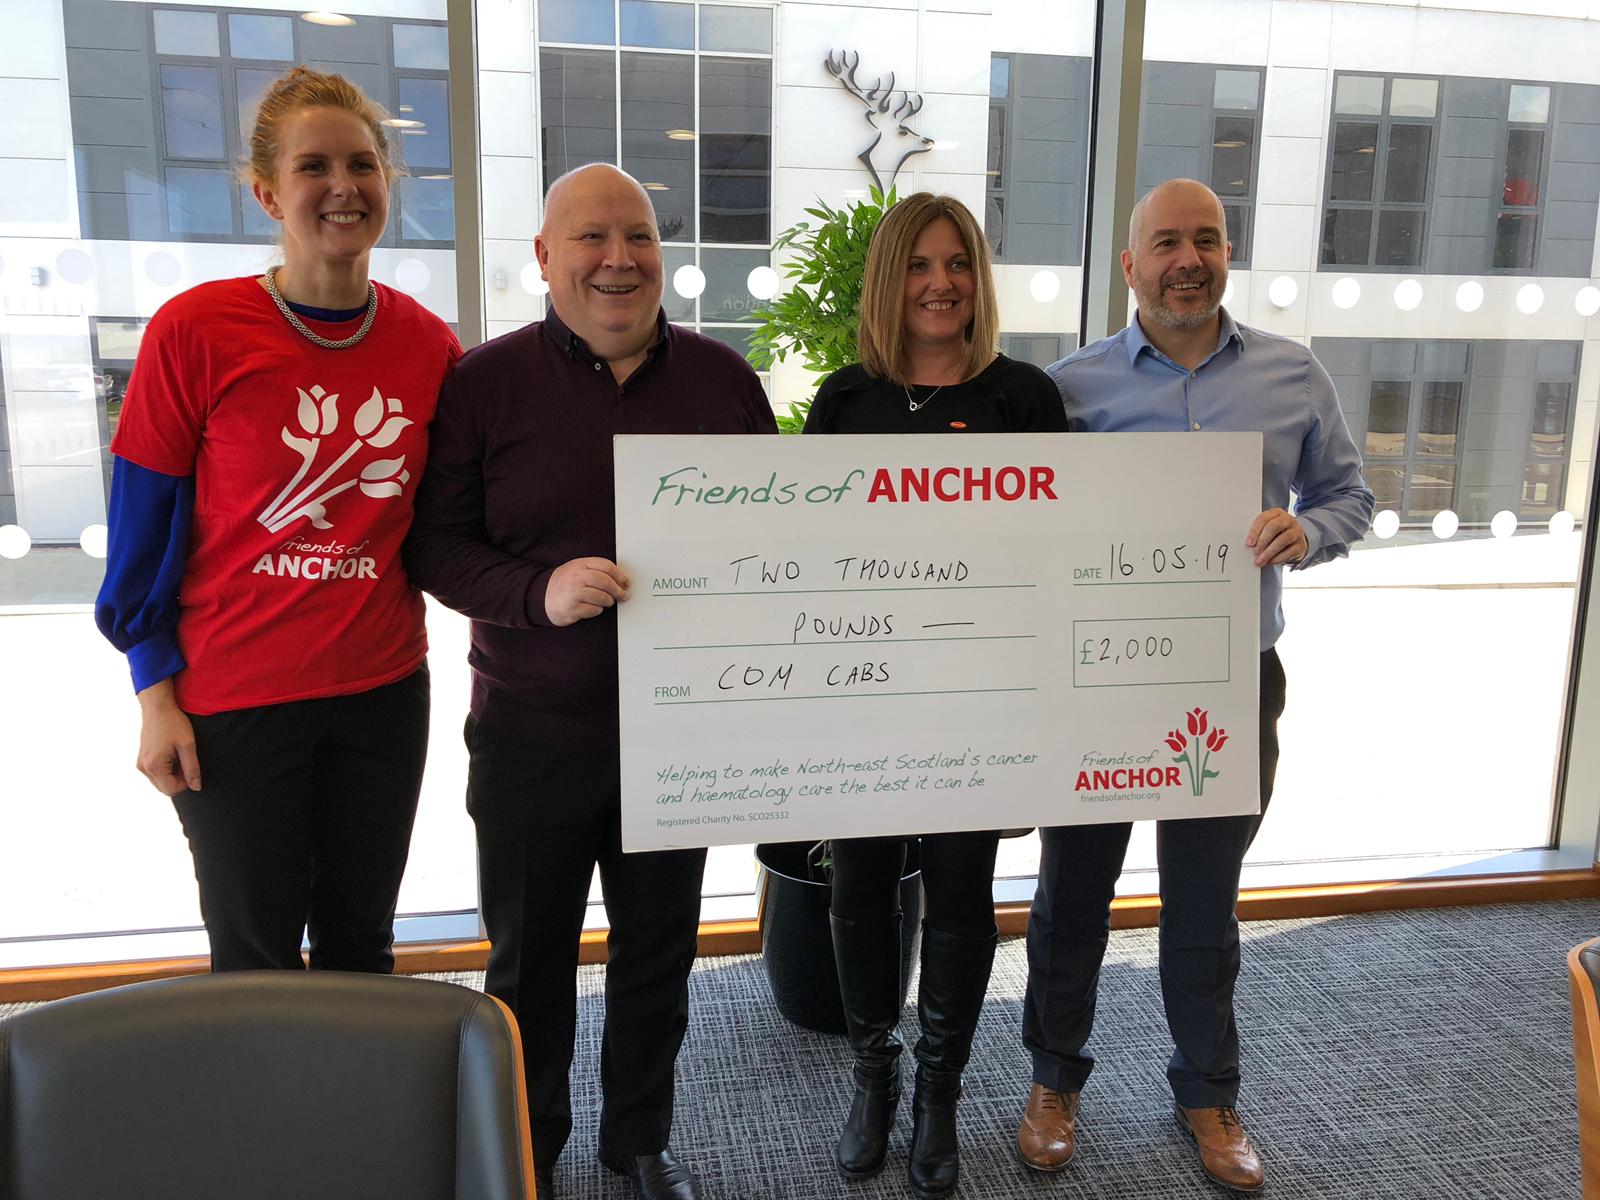 Com Cabs have given £2,000 to Friends of Anchor.